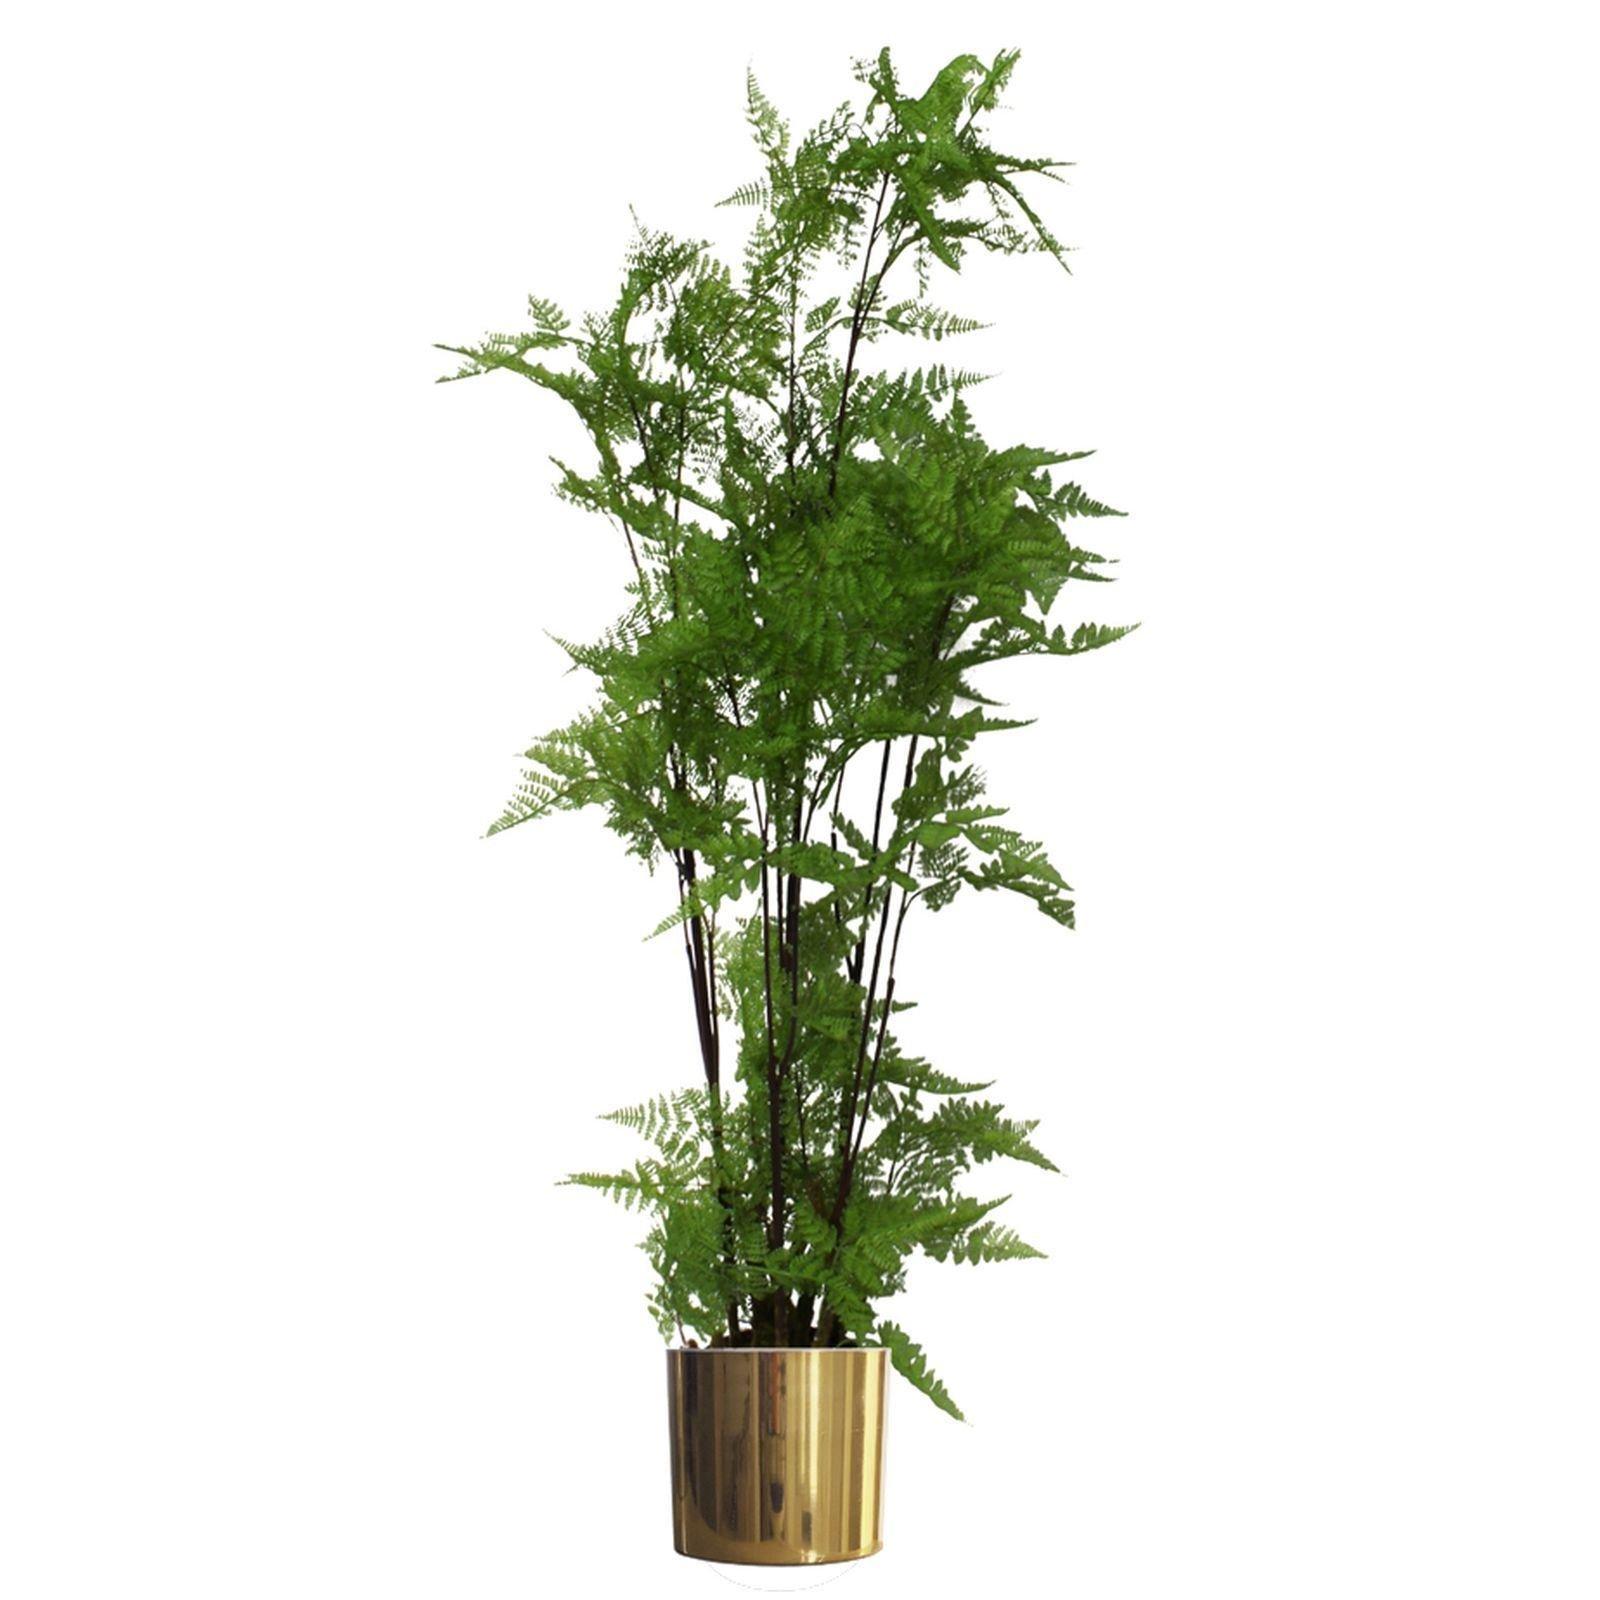 150cm Artificial Natural Moss Base Fern Foliage Plant with Gold Metal Planter